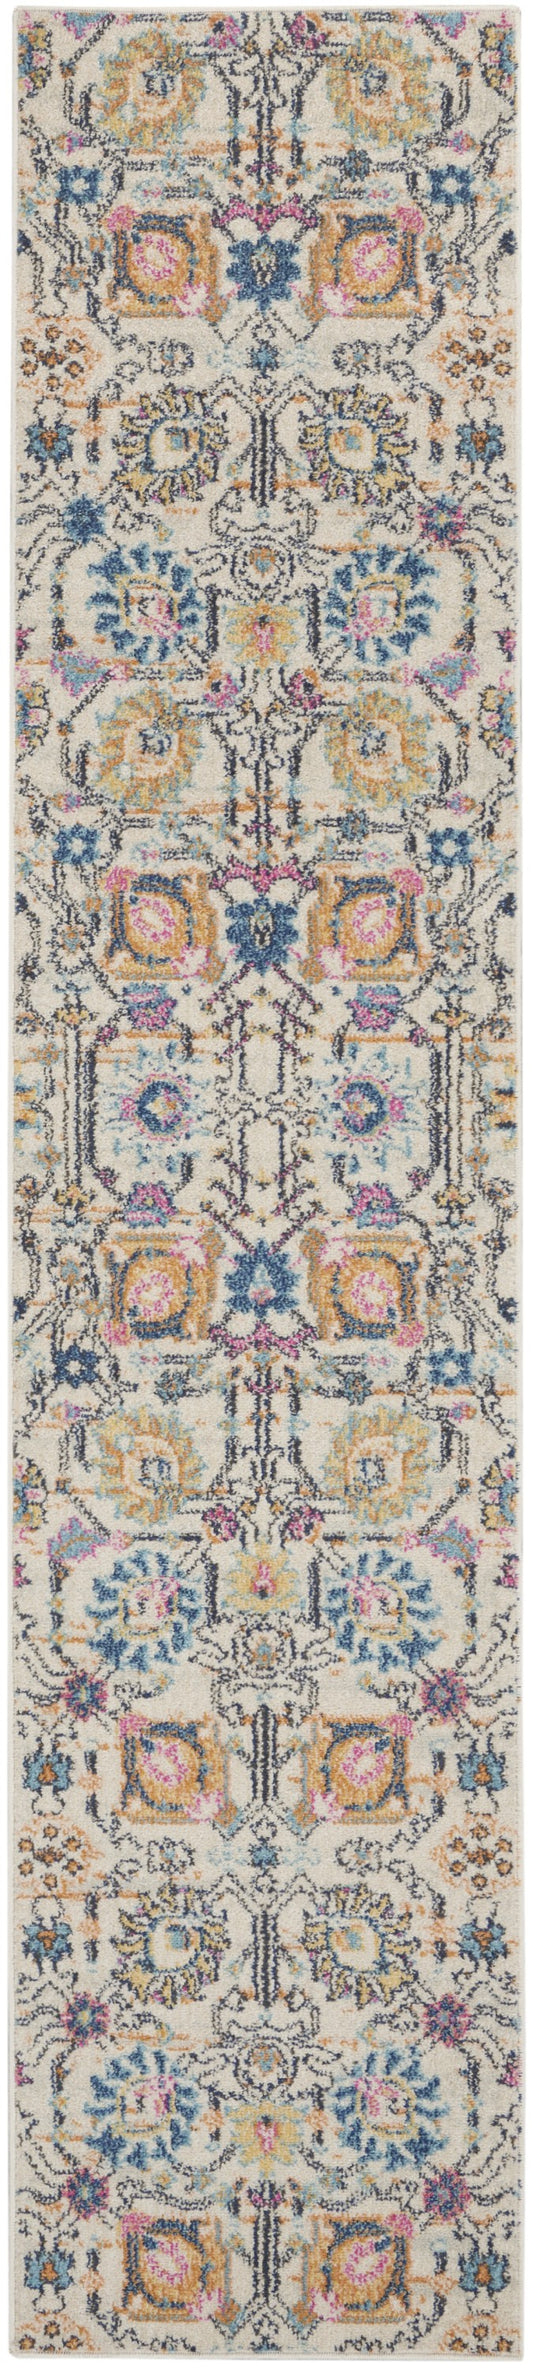 2' X 3' Orange And Ivory Floral Power Loom Area Rug